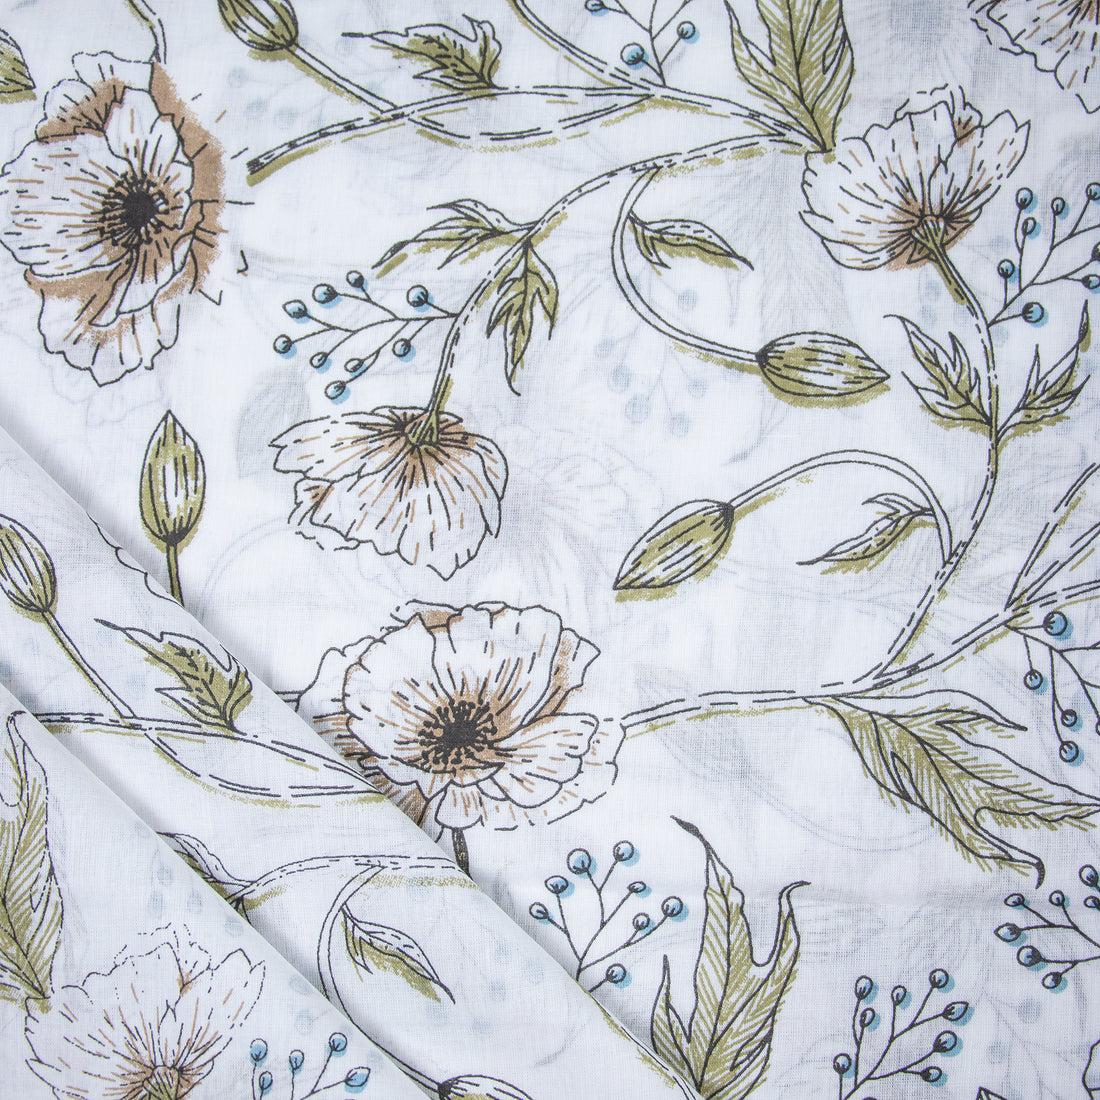 Floral Block Printed Cotton Soft Cotton Fabric For Dress Material